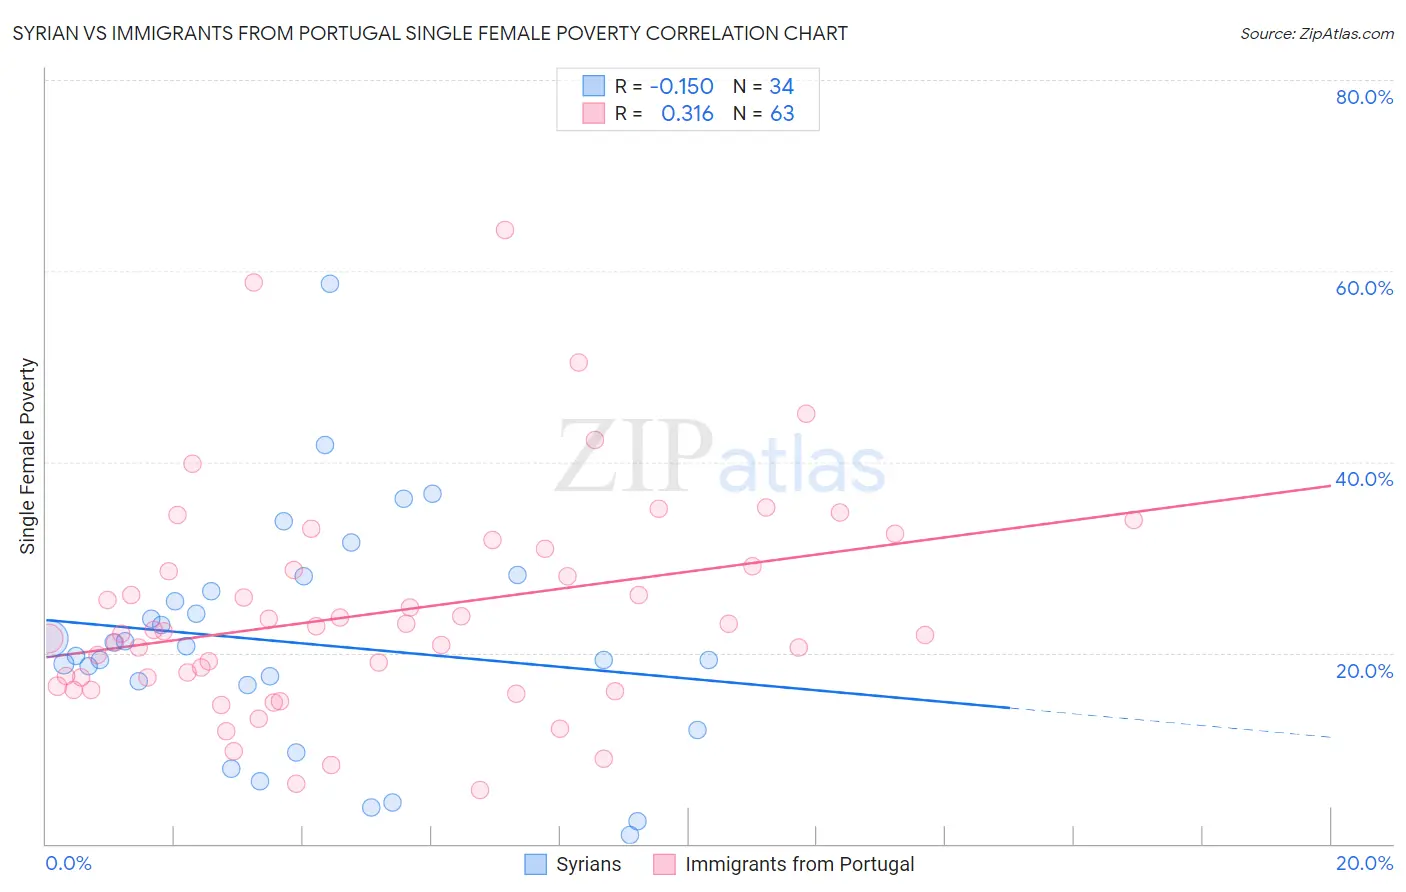 Syrian vs Immigrants from Portugal Single Female Poverty